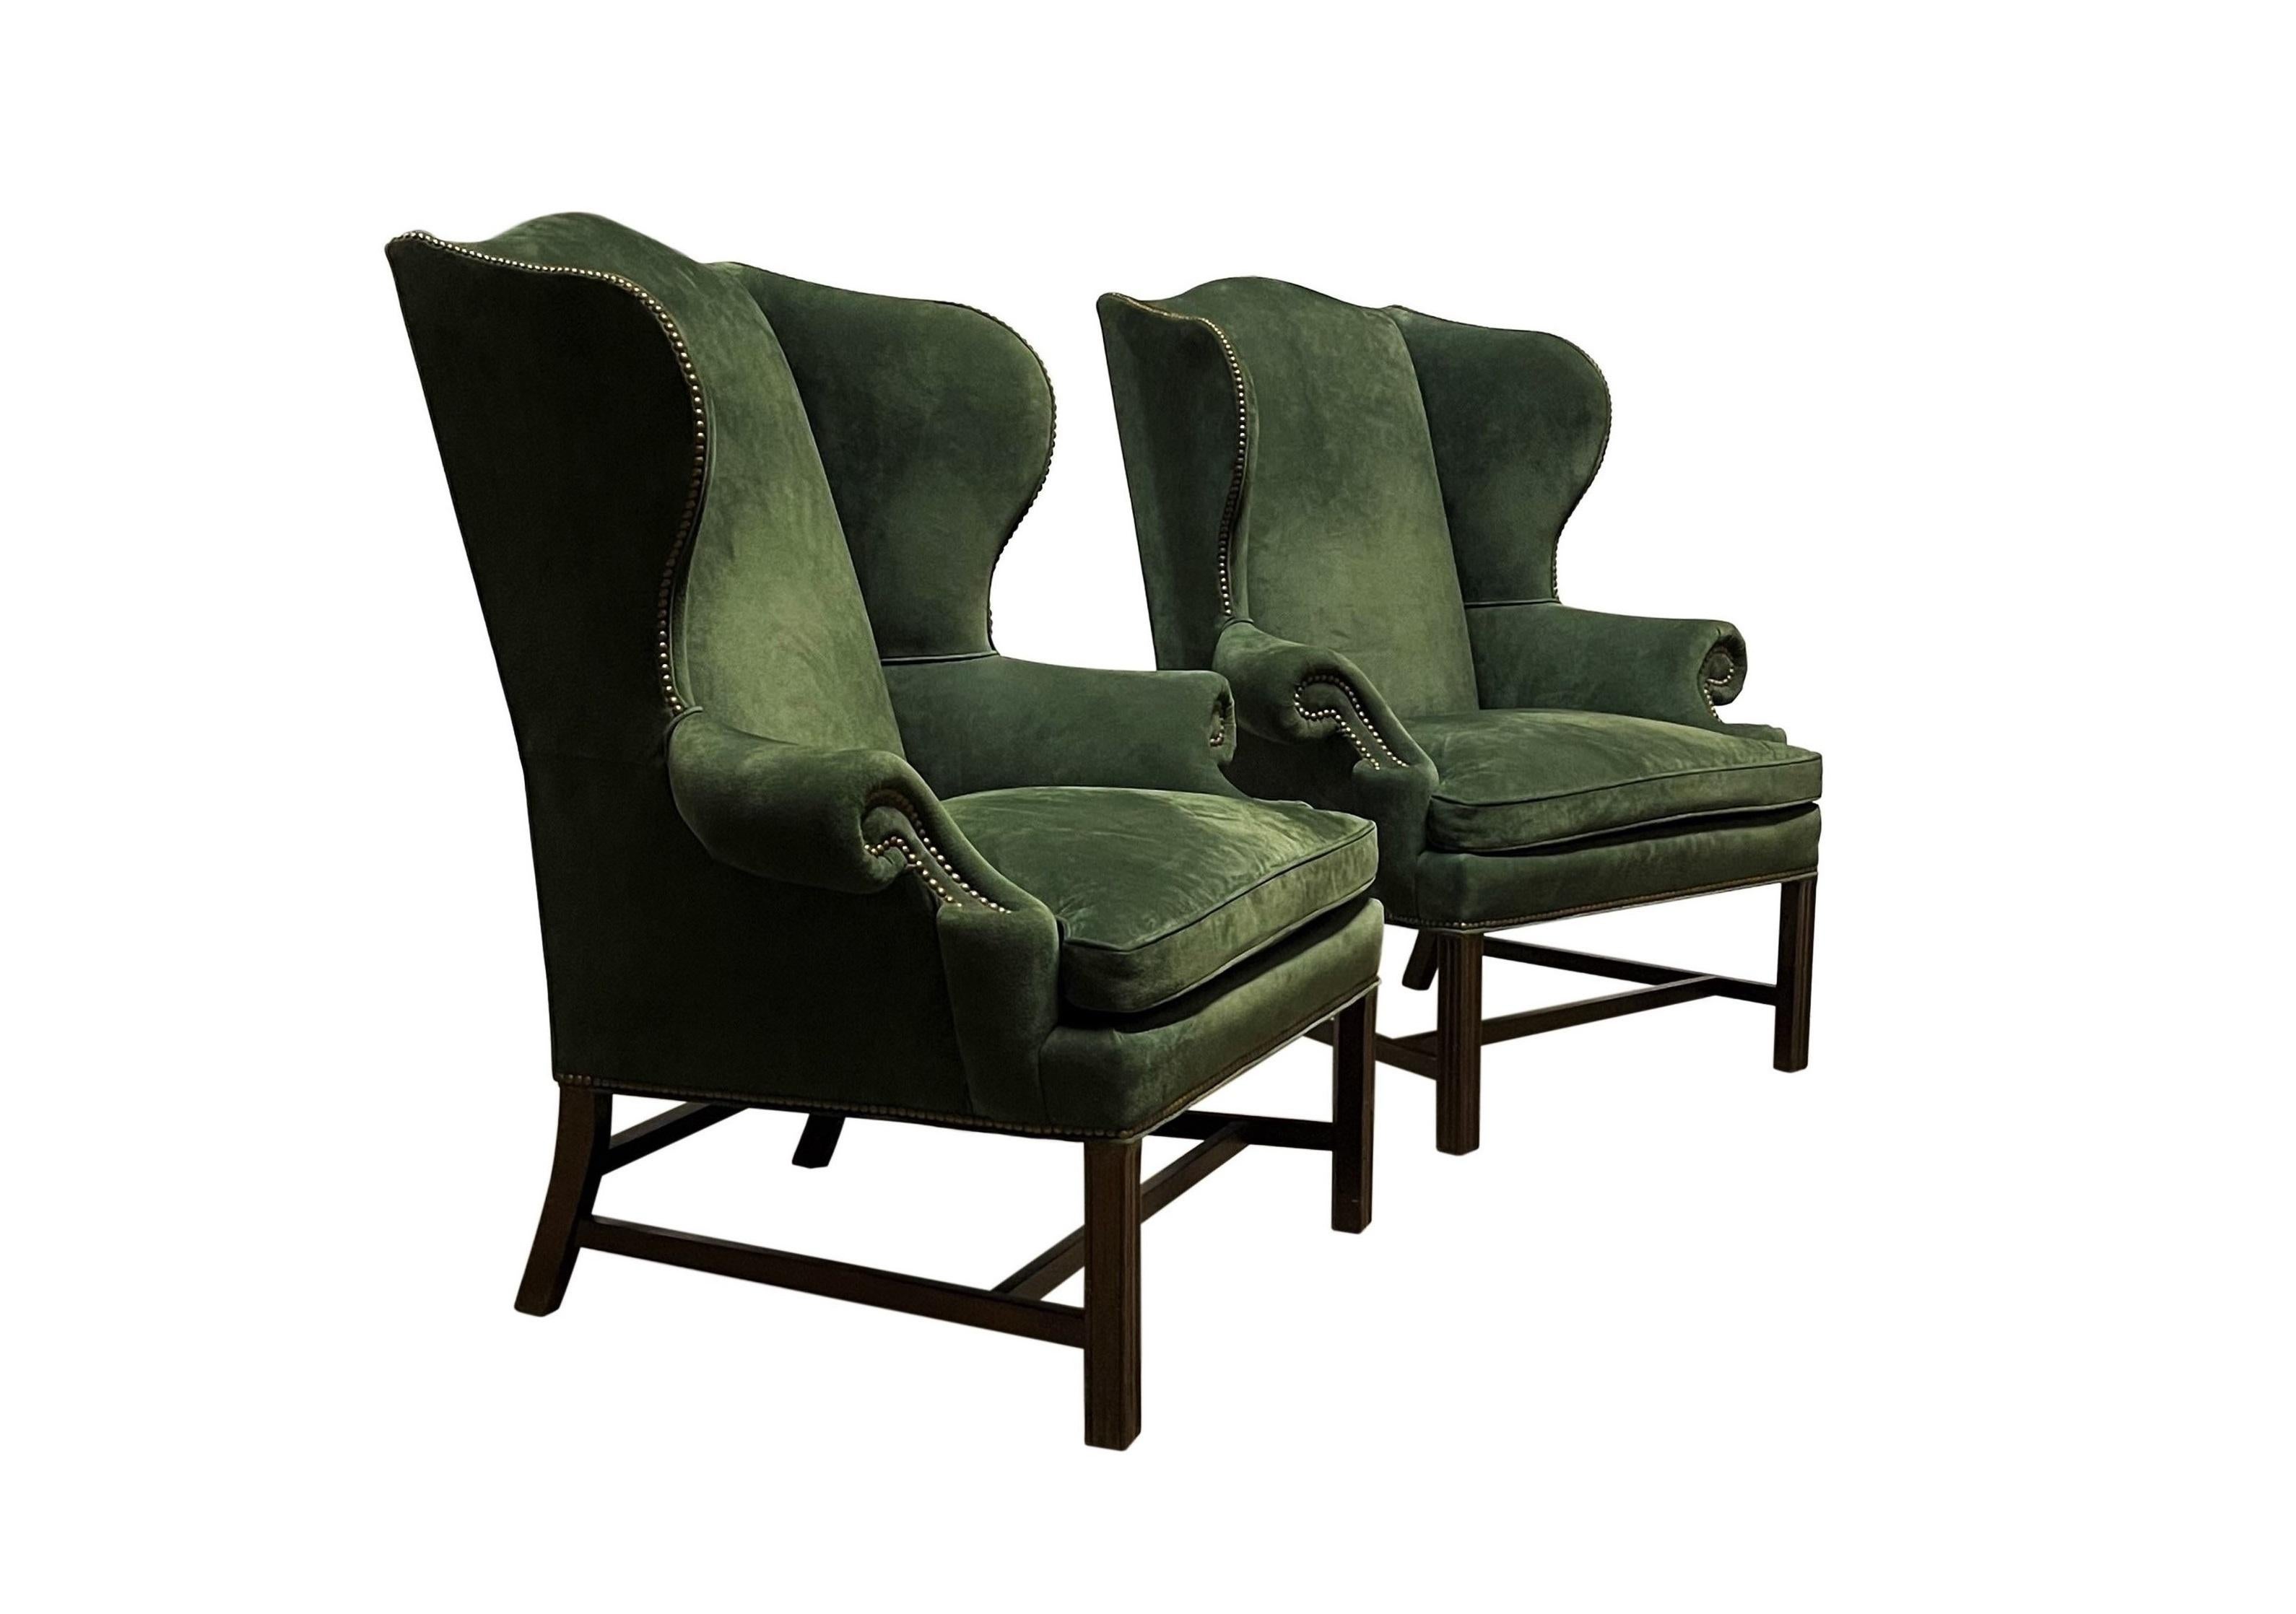 An extraordinary and comfortable pair of early to mid-20th century Georgian green suede leather wingback armchairs. Each chair features a serpentine-shaped crest rail, wing panels, rolled armrests and loose cushioned down seat. Richly detailed, the